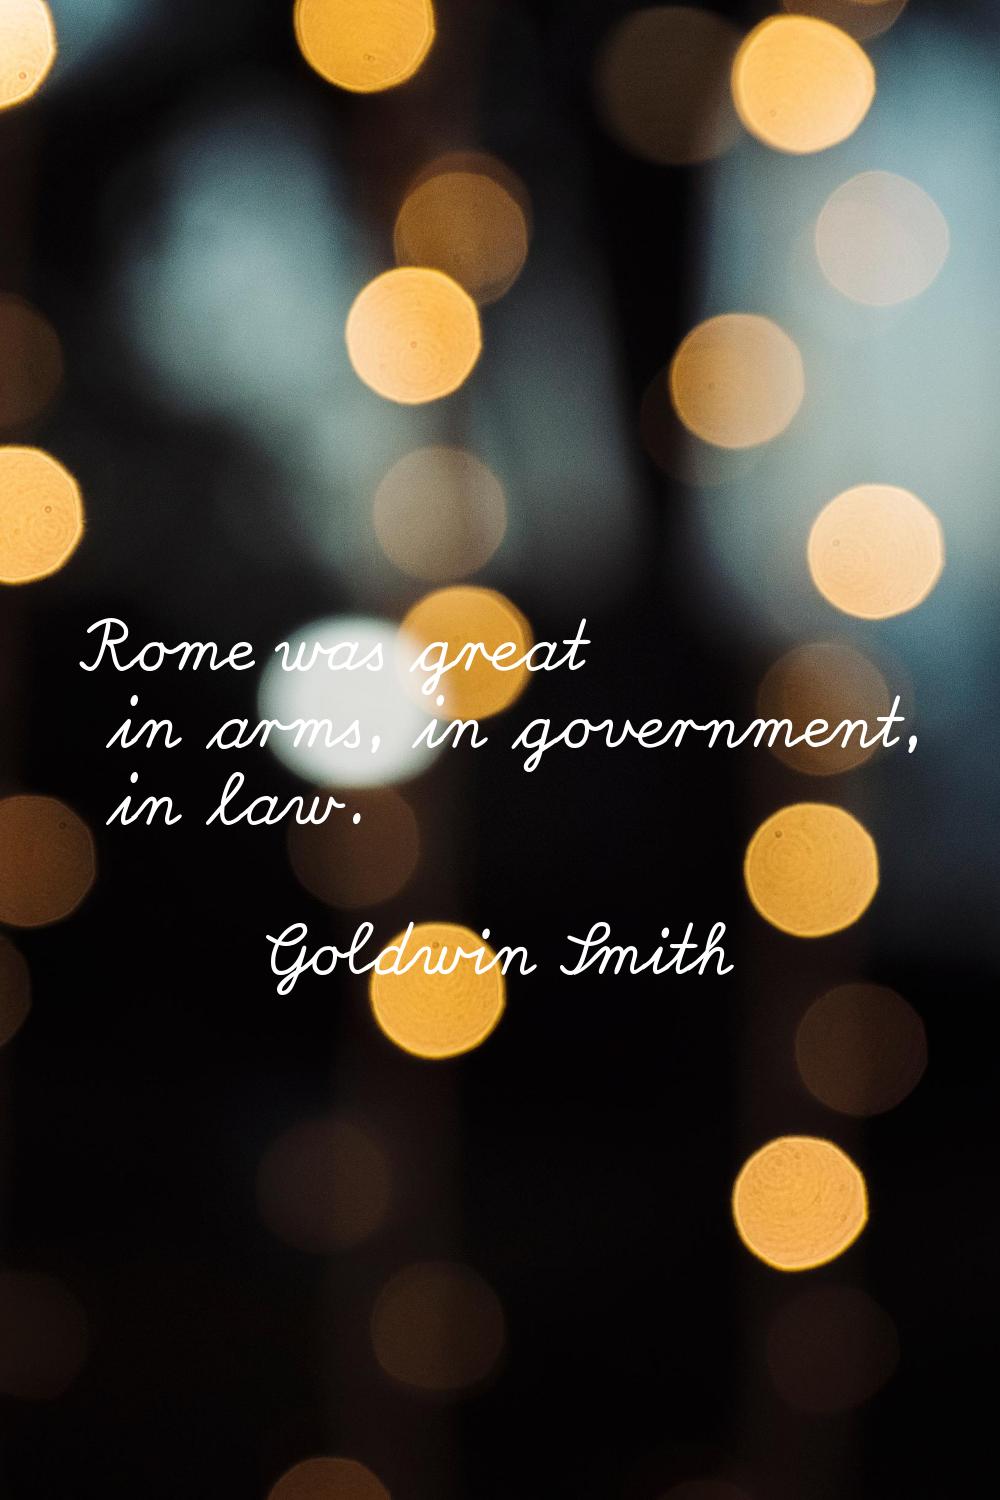 Rome was great in arms, in government, in law.